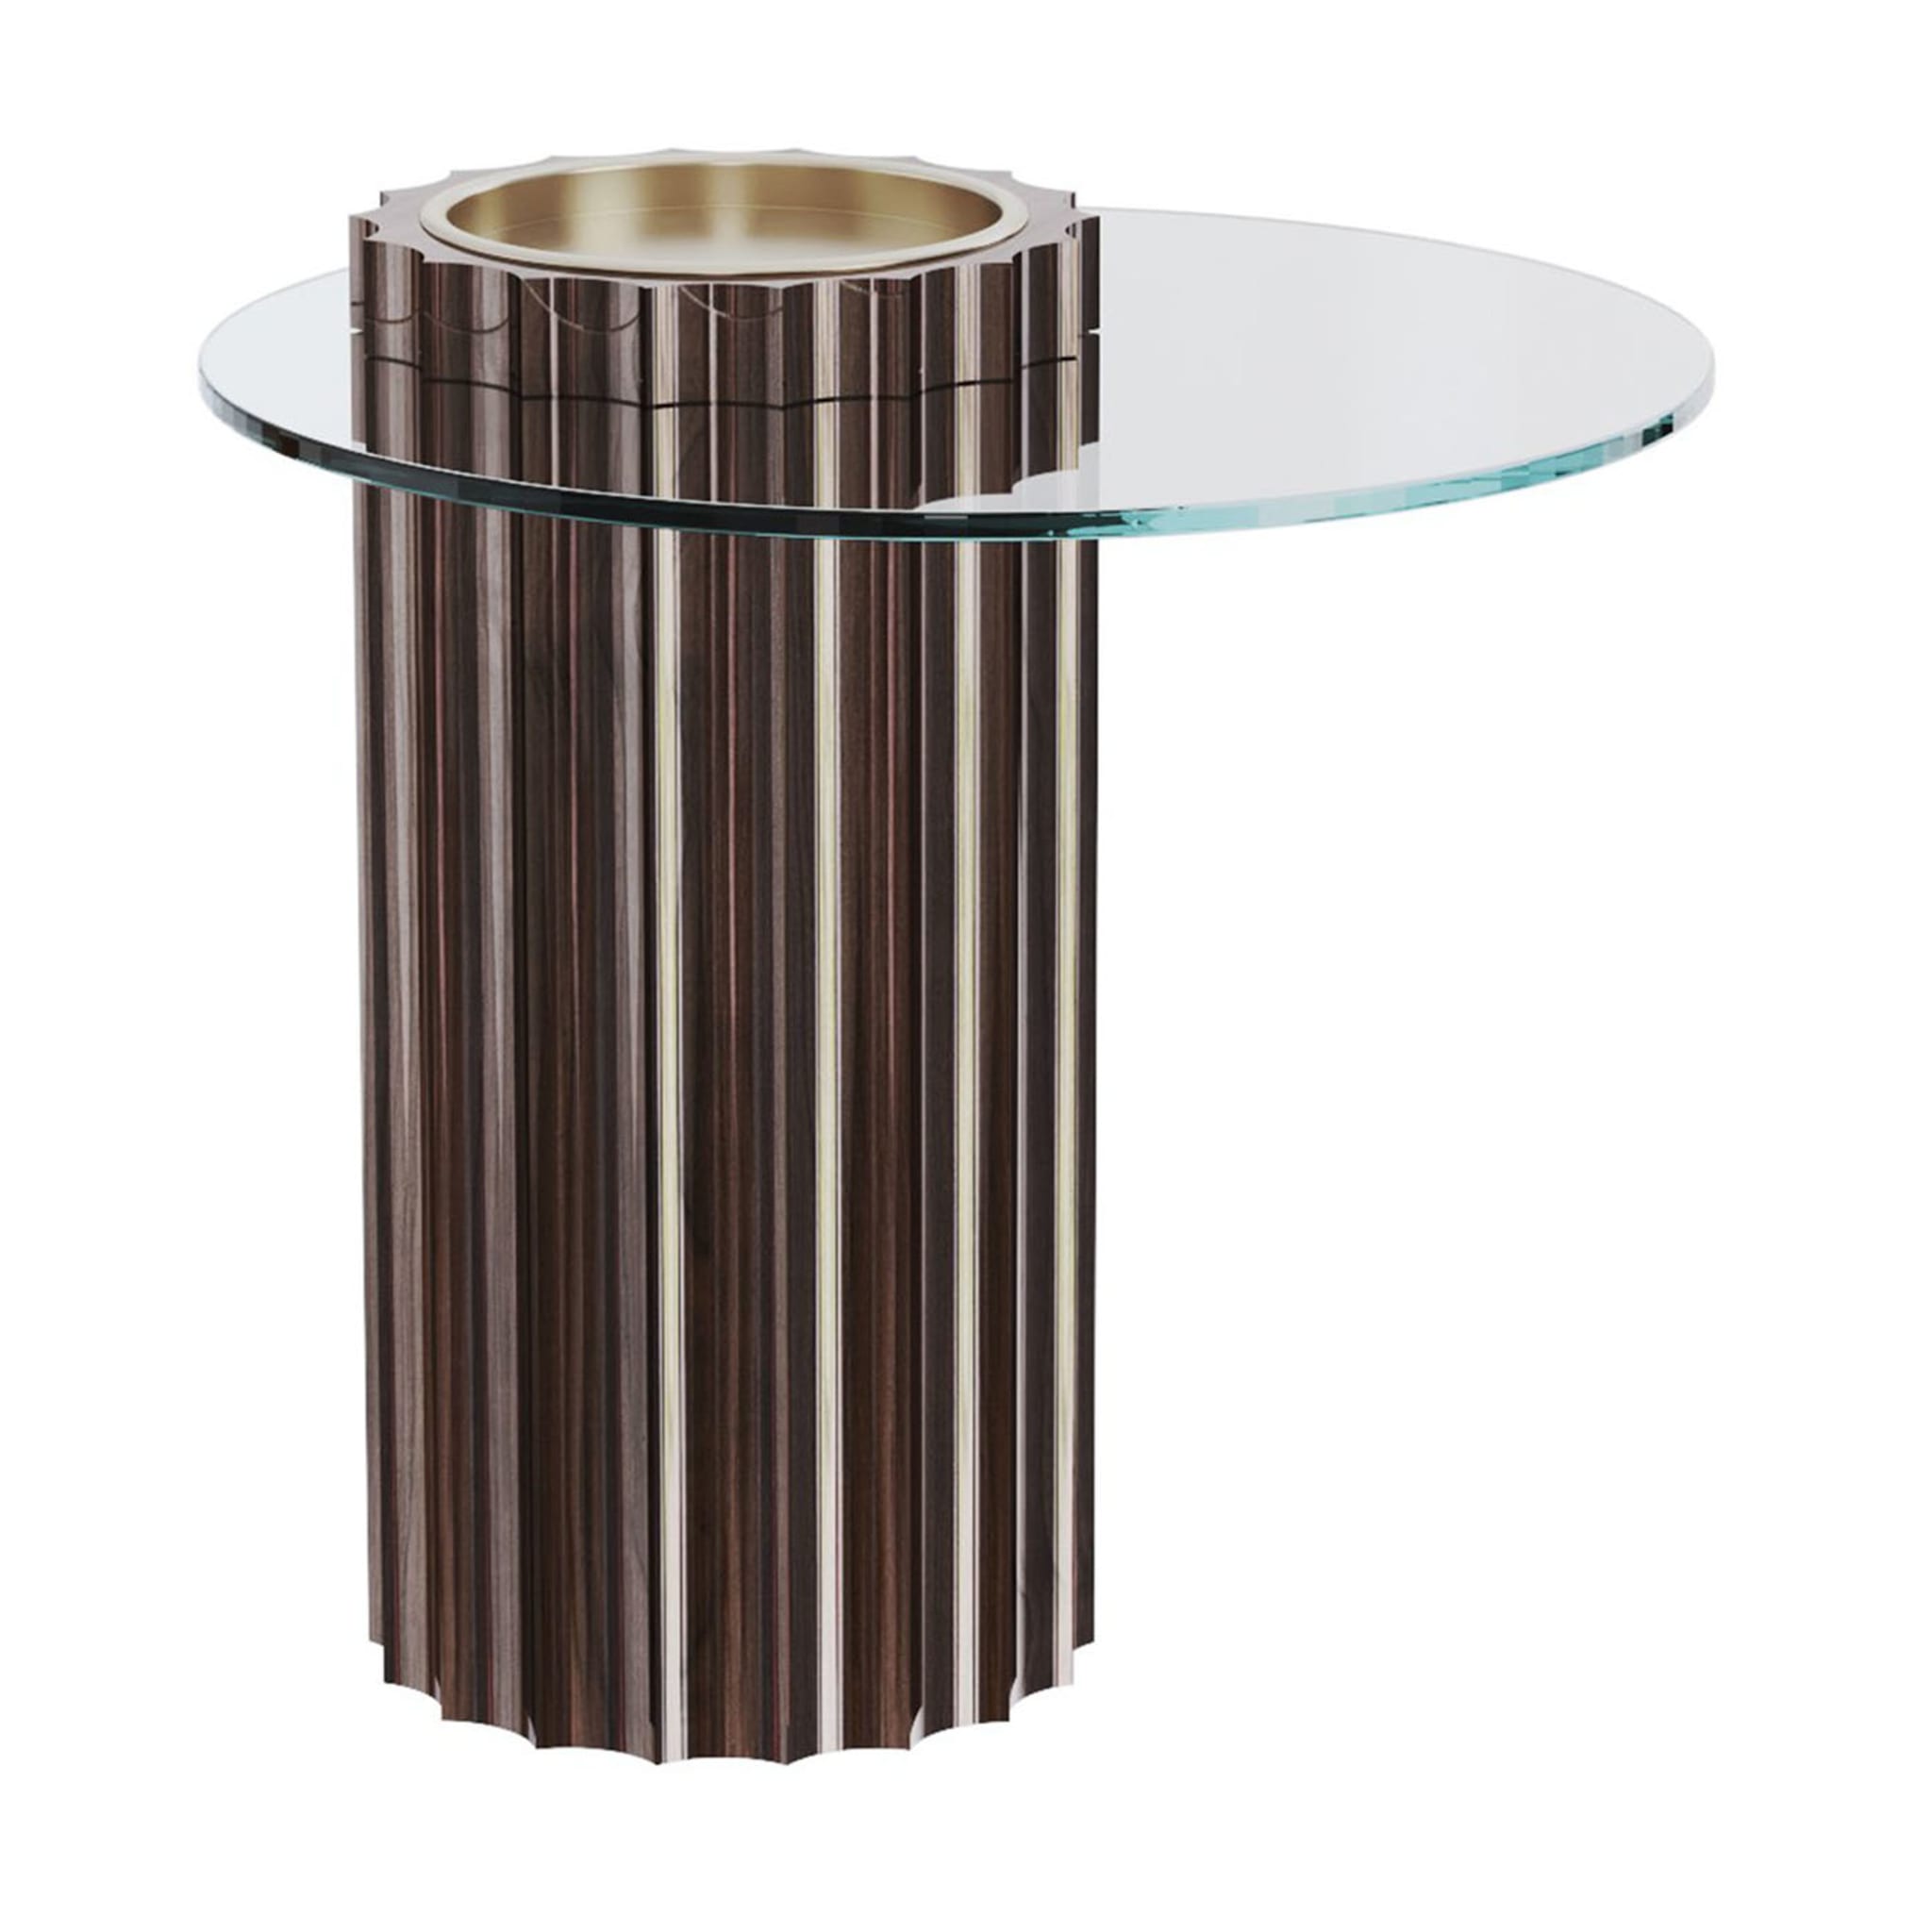 Modern Art Deco Side Table In Lacquered Dark Wood With Glass 52cm - Main view